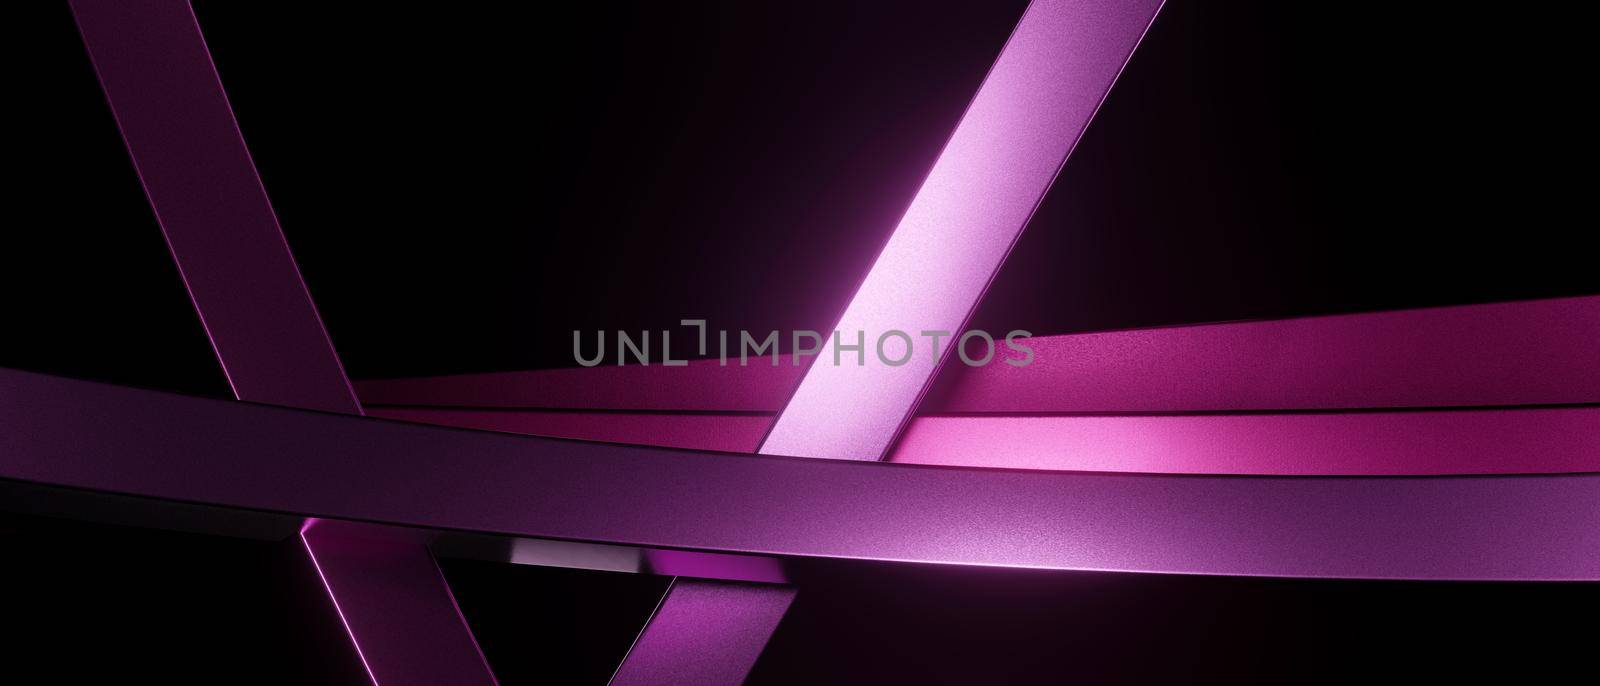 Abstract Modern Shiny Metallic Smooth Purple Pink Abstract Background 3D Illustration by yay_lmrb